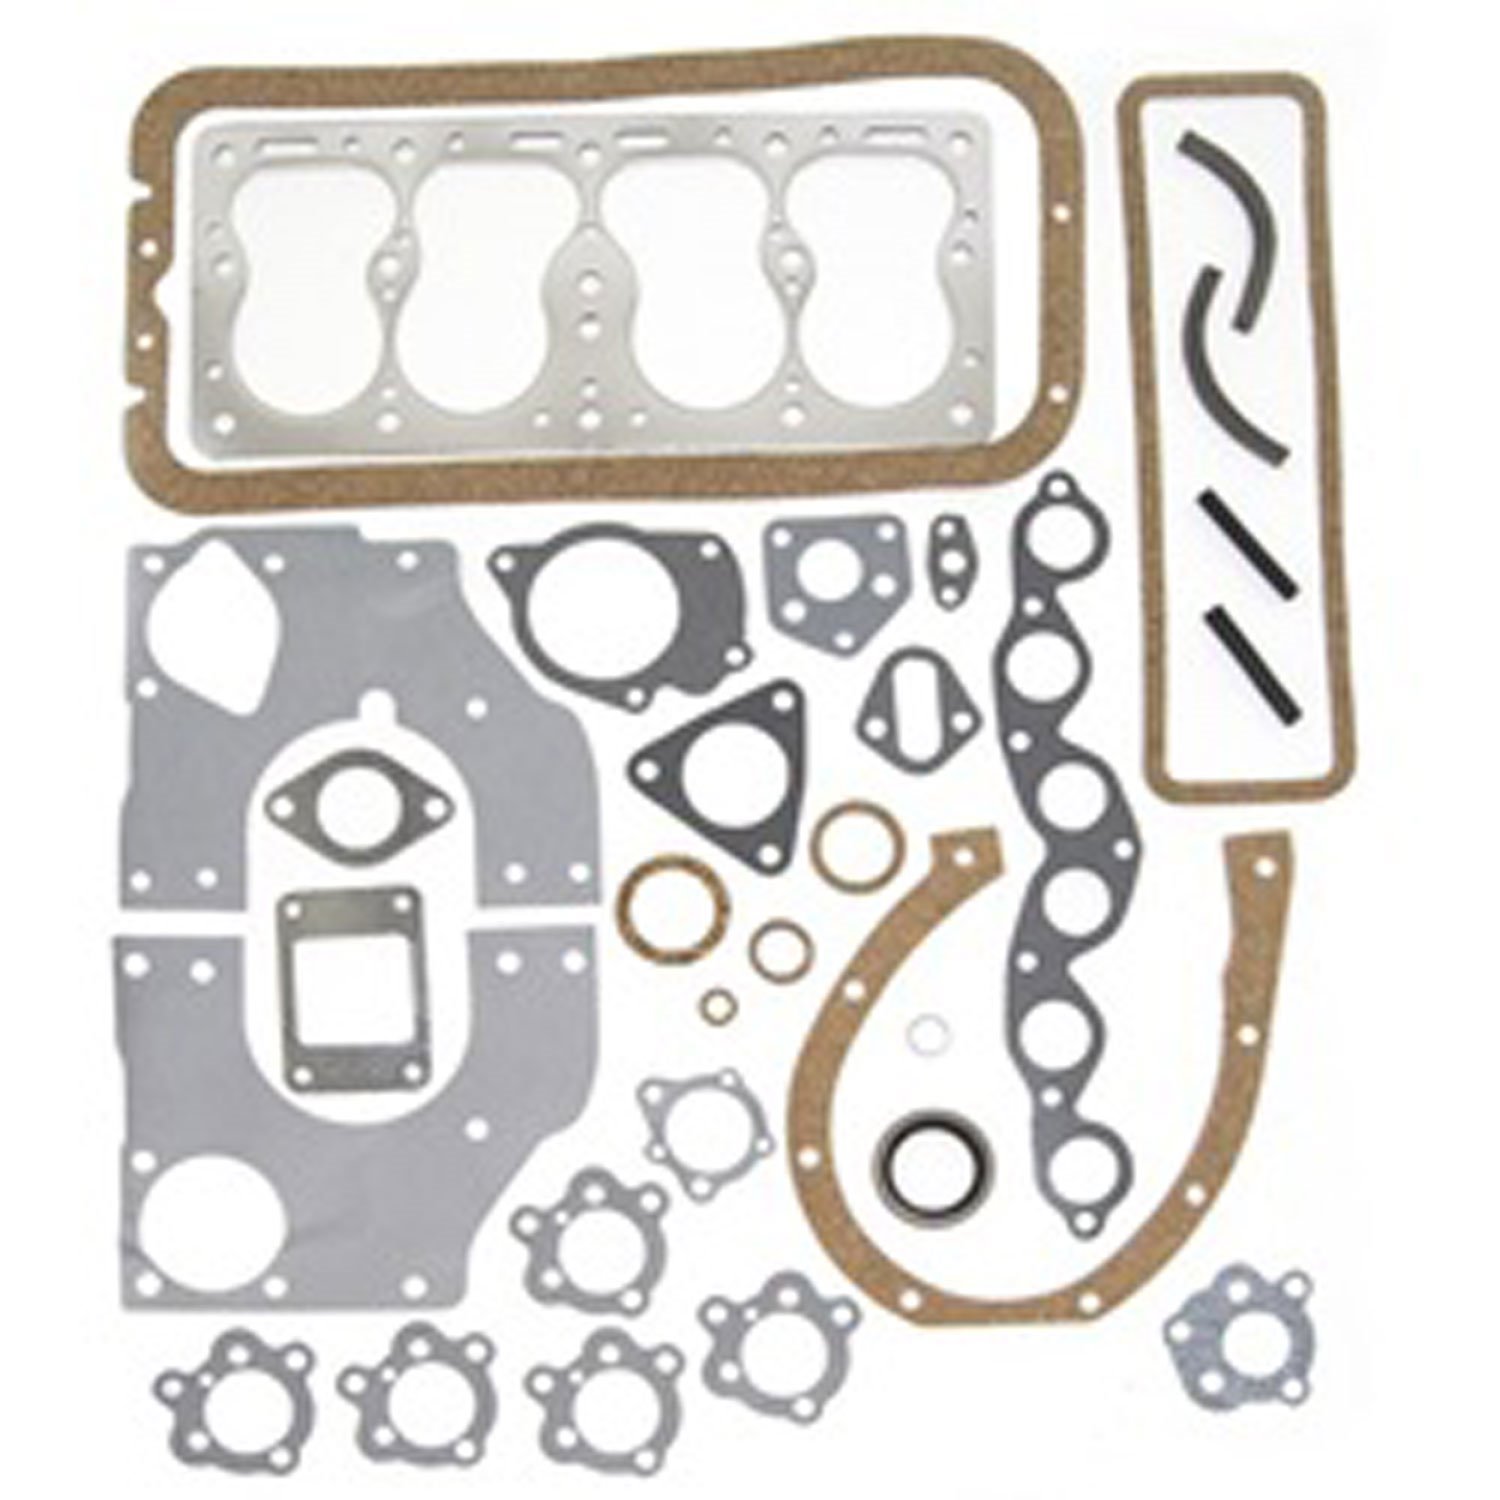 This engine gasket set fits the 134 CI L-head engine in 41-45 Ford GPW Willys MB 46-49 CJ-2A 49-53 C